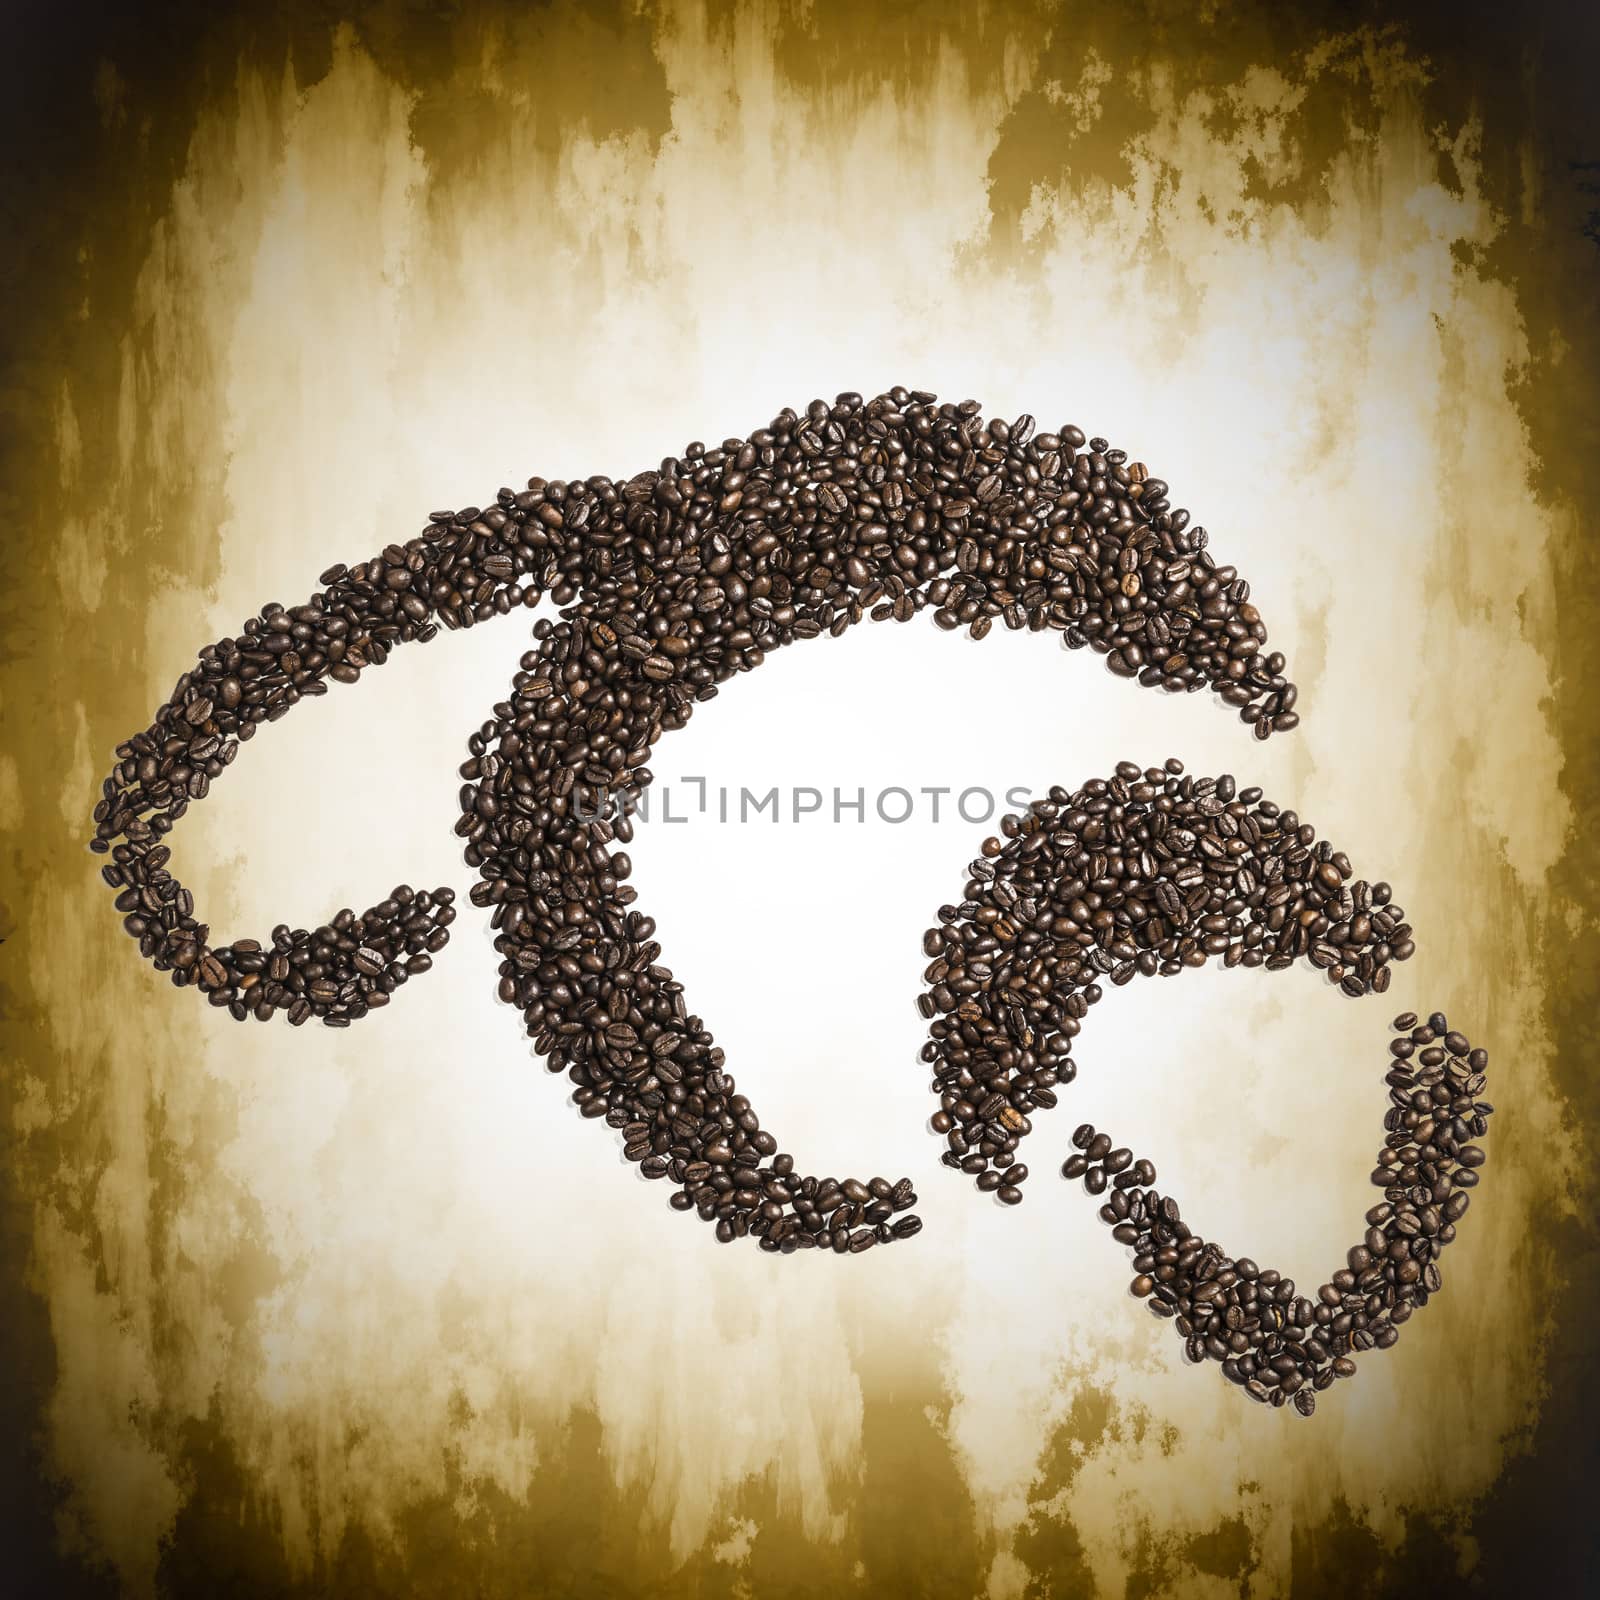 Image of a croissant made from coffee beans